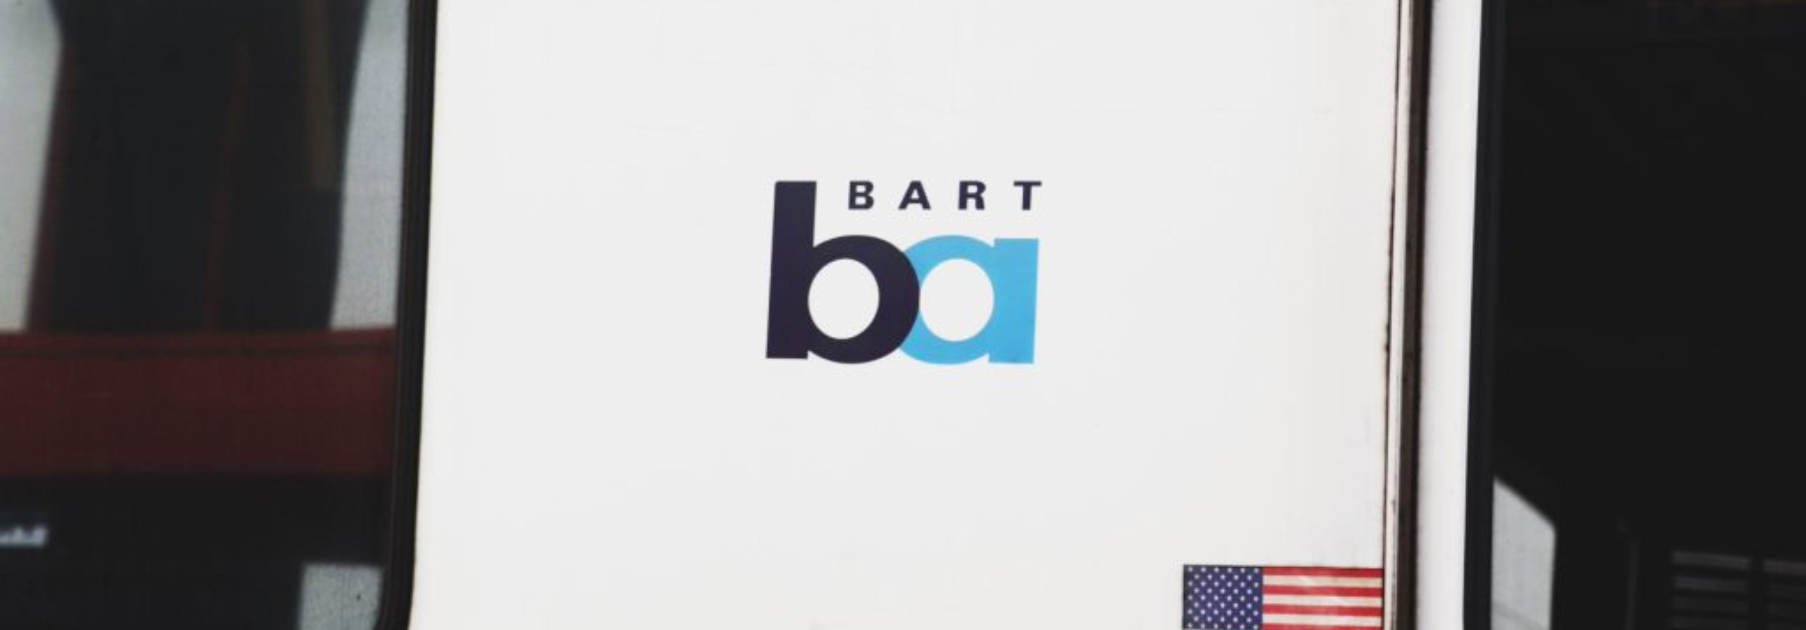 BART – Clearance Investigation for New Train Car